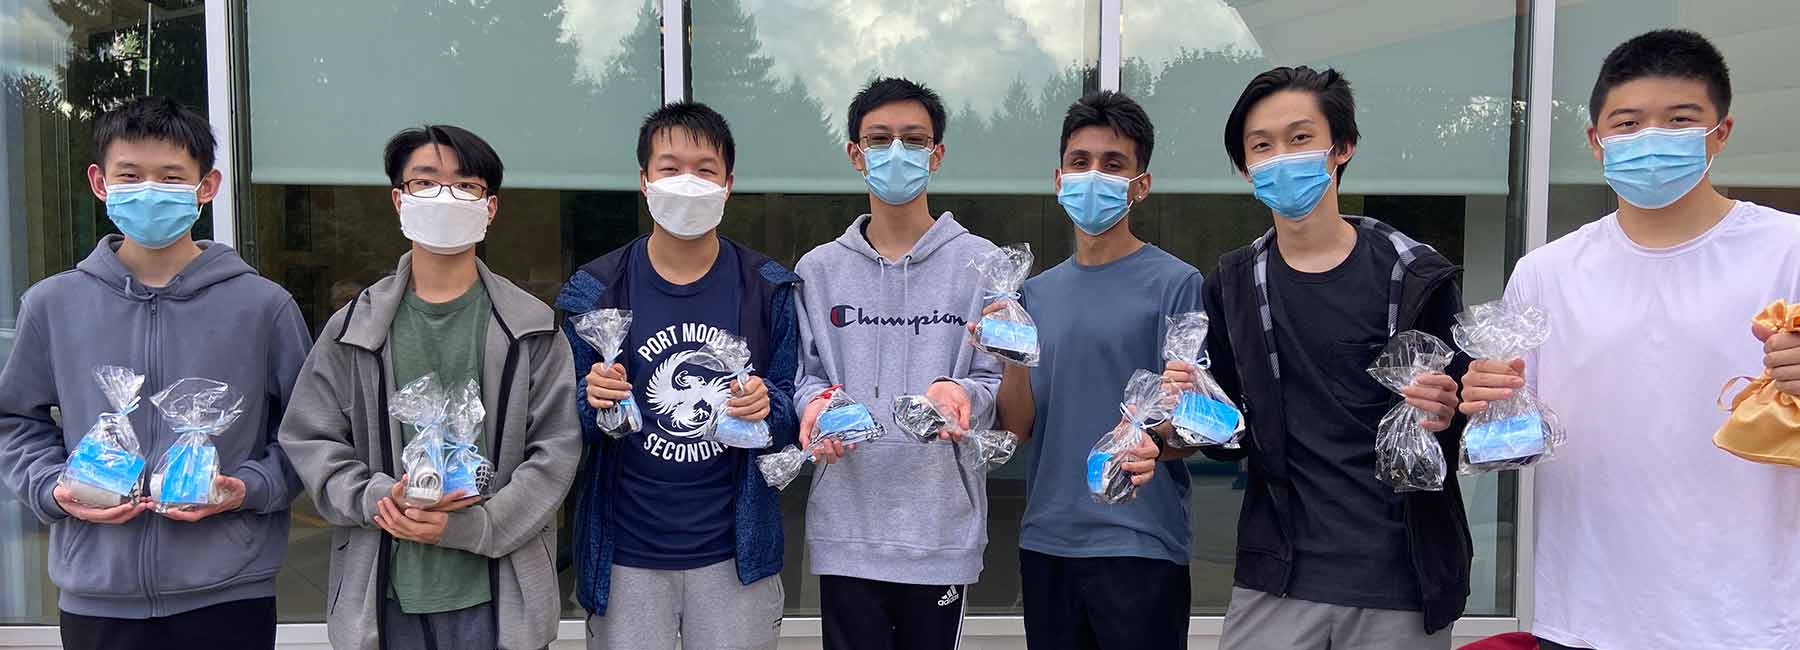 3D Printing Club Donates COVID-19 Safety Items